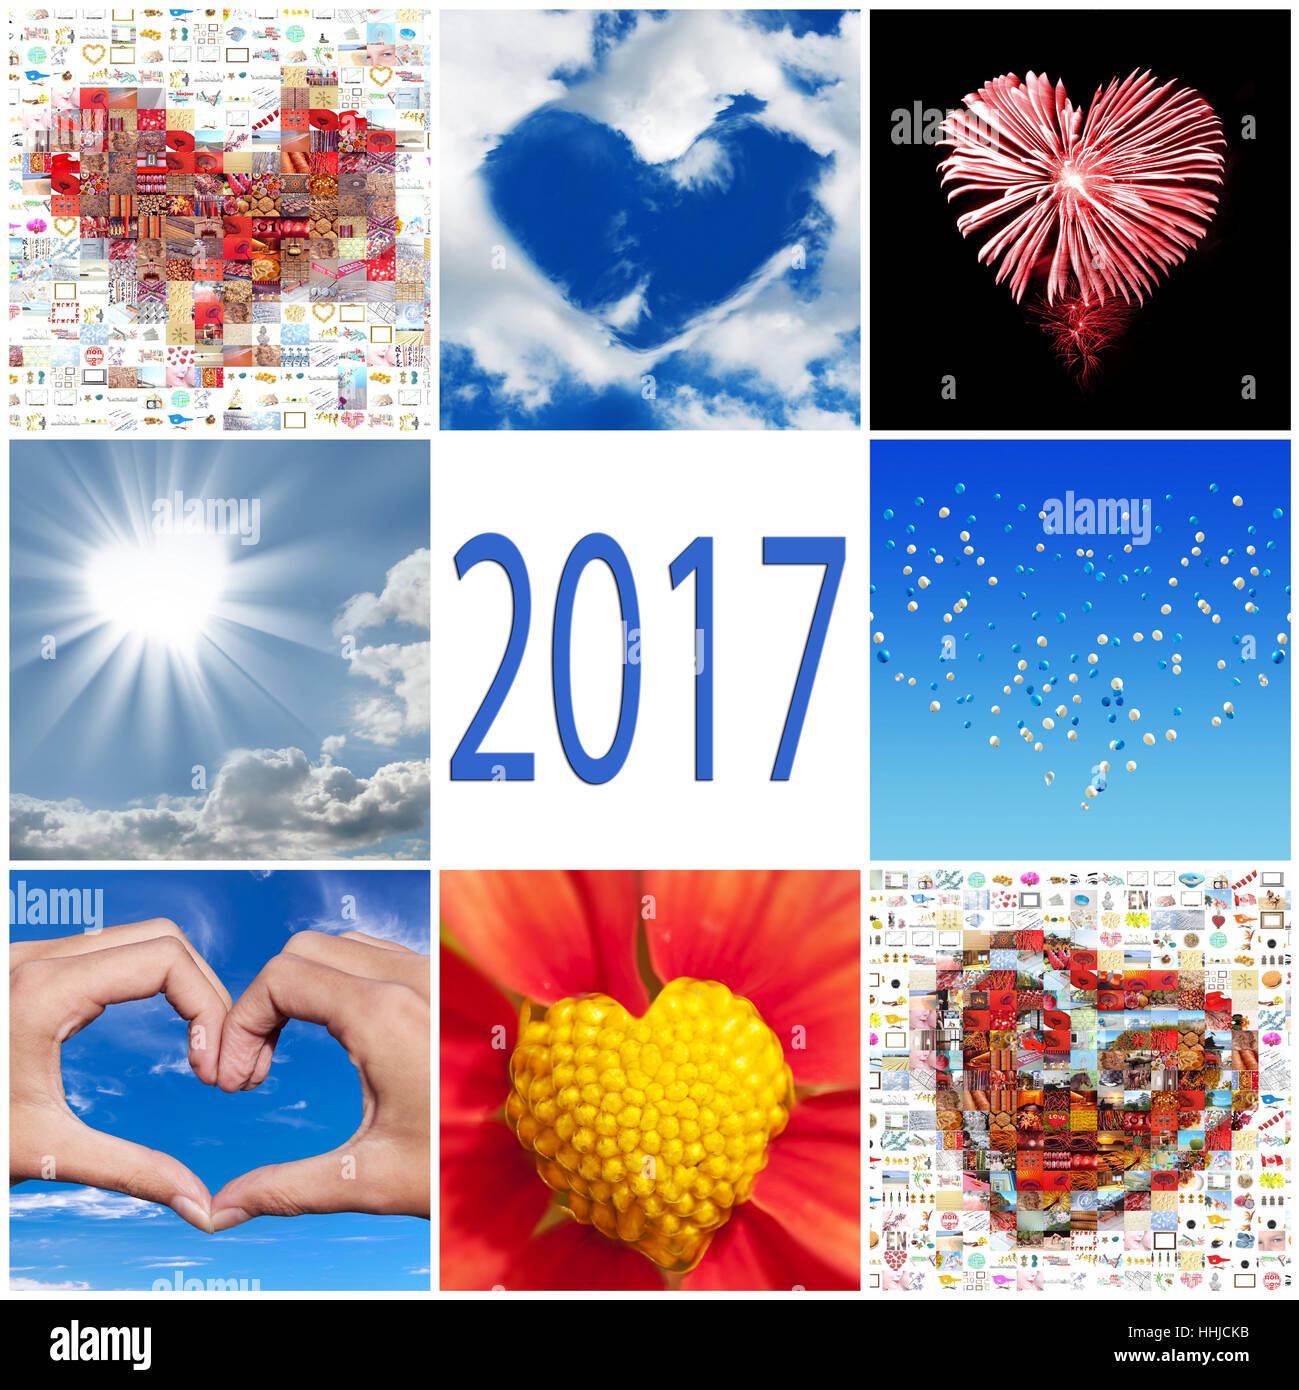 2017 collection of hearts greeting card Stock Photo